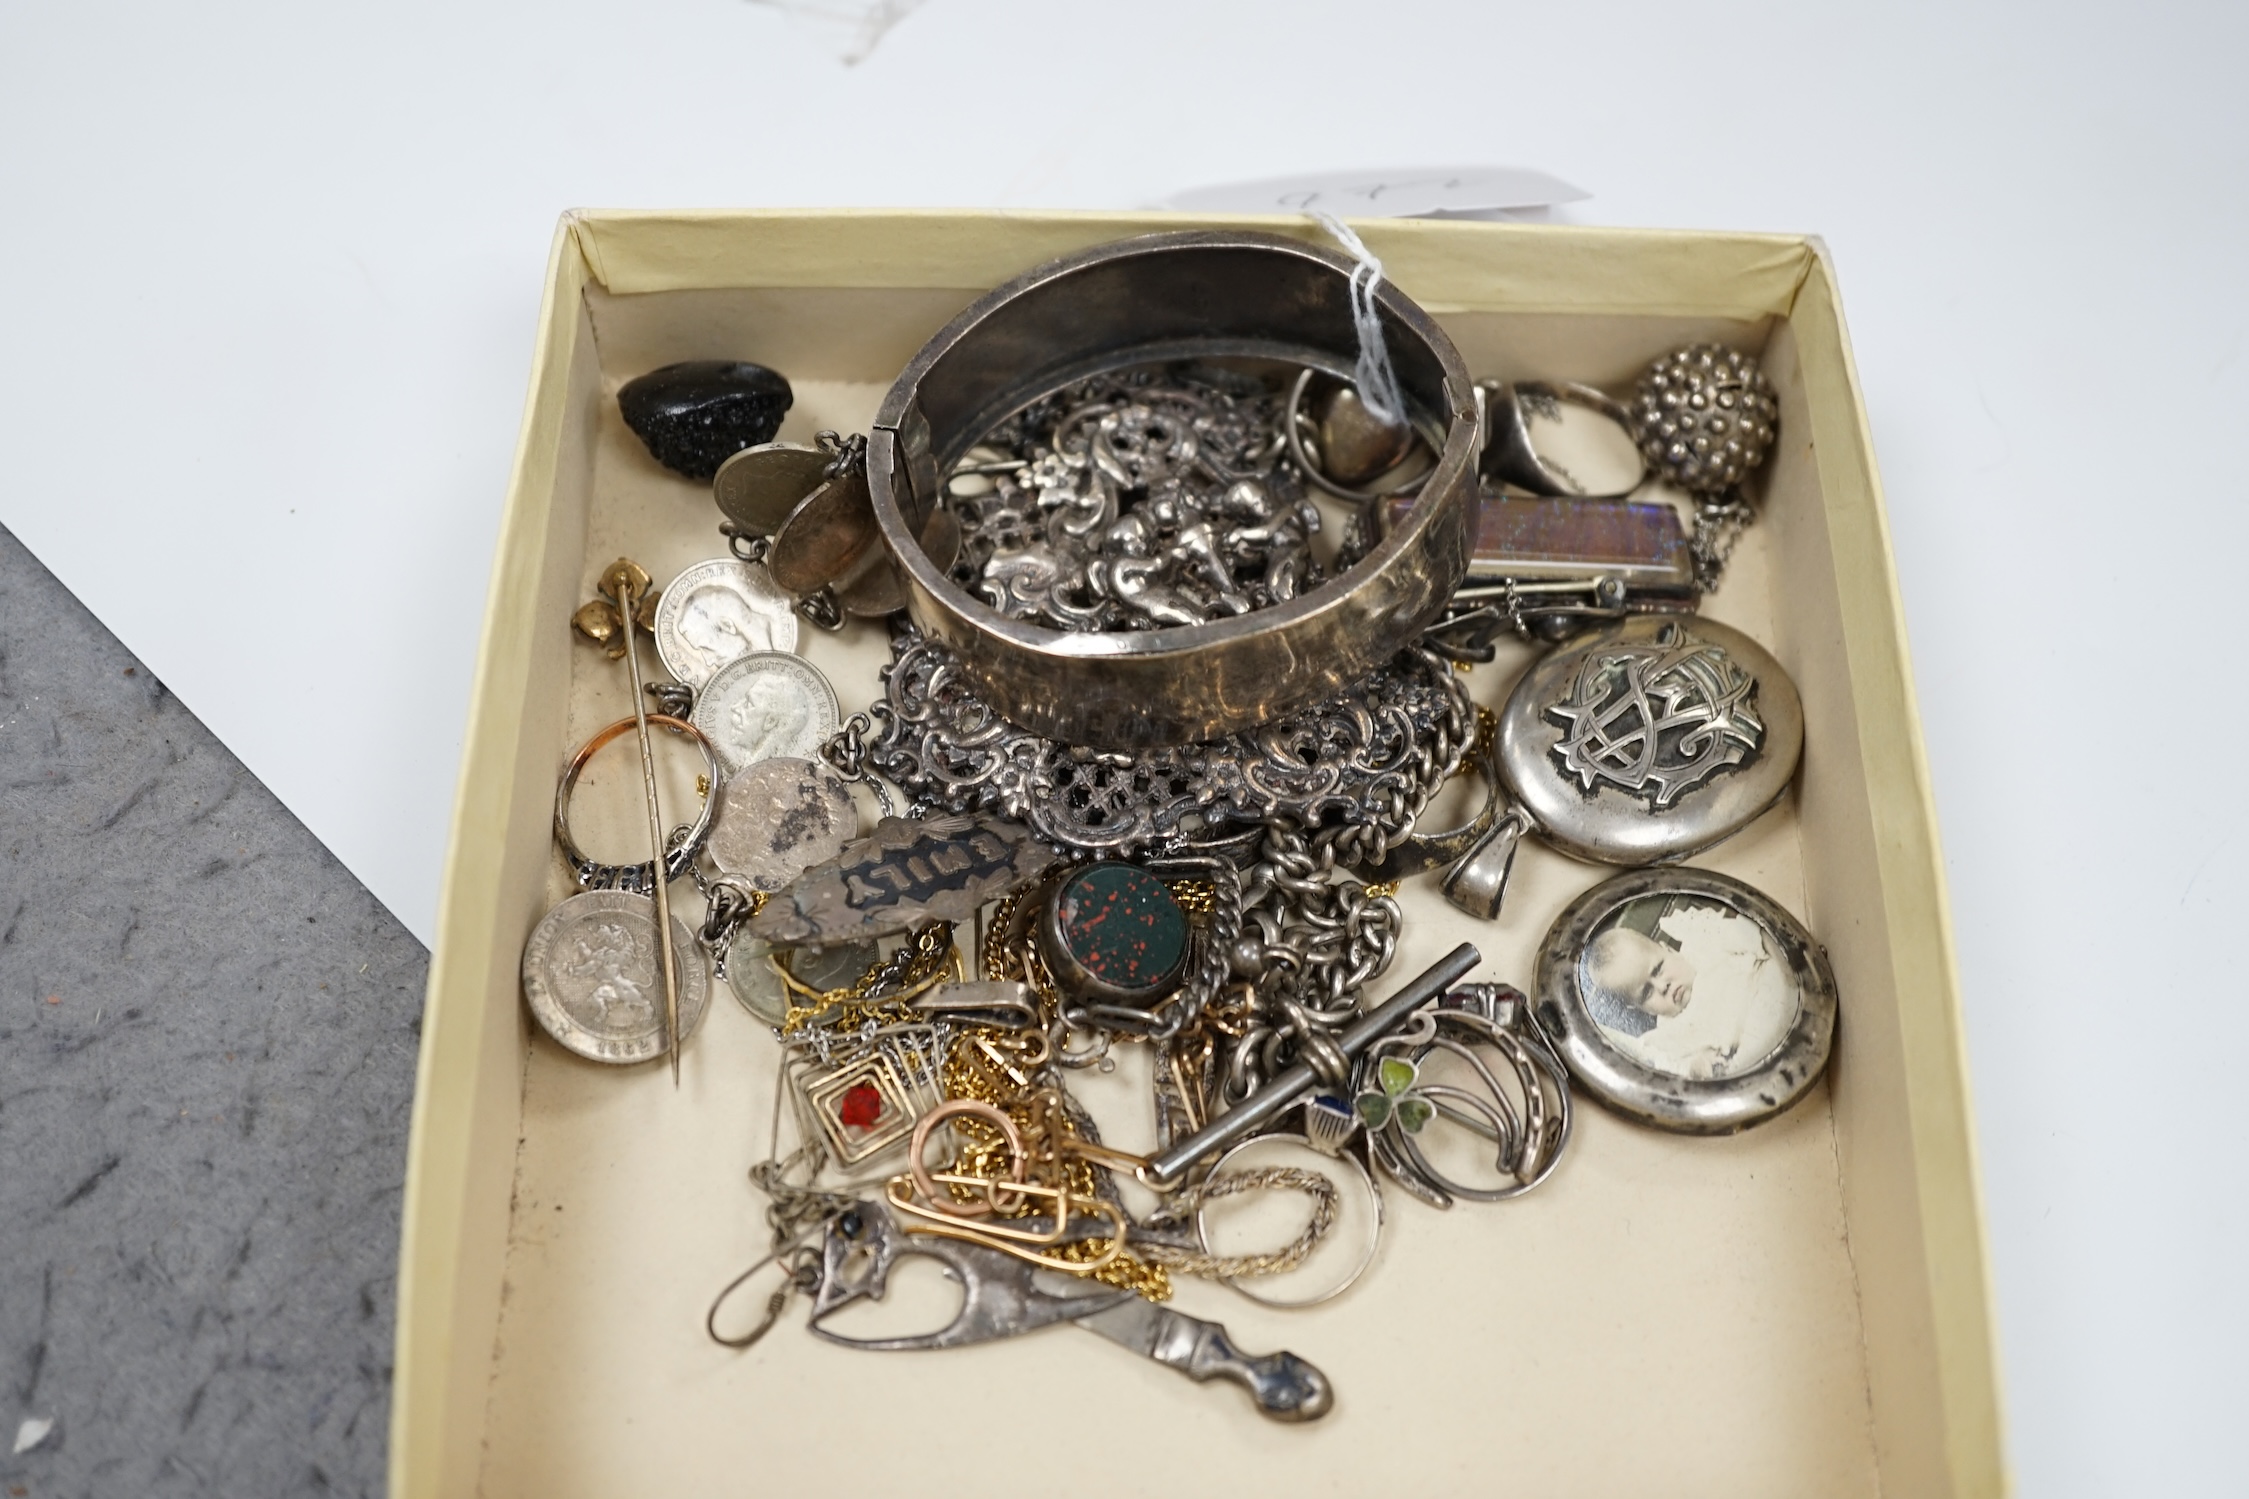 A quantity of assorted Victorian and later jewellery, including silver hinged bangle, a silver albert, monogrammed locket, banded agate set brooch, unmounted stones including cabochon agates and malachite, etc. Condition